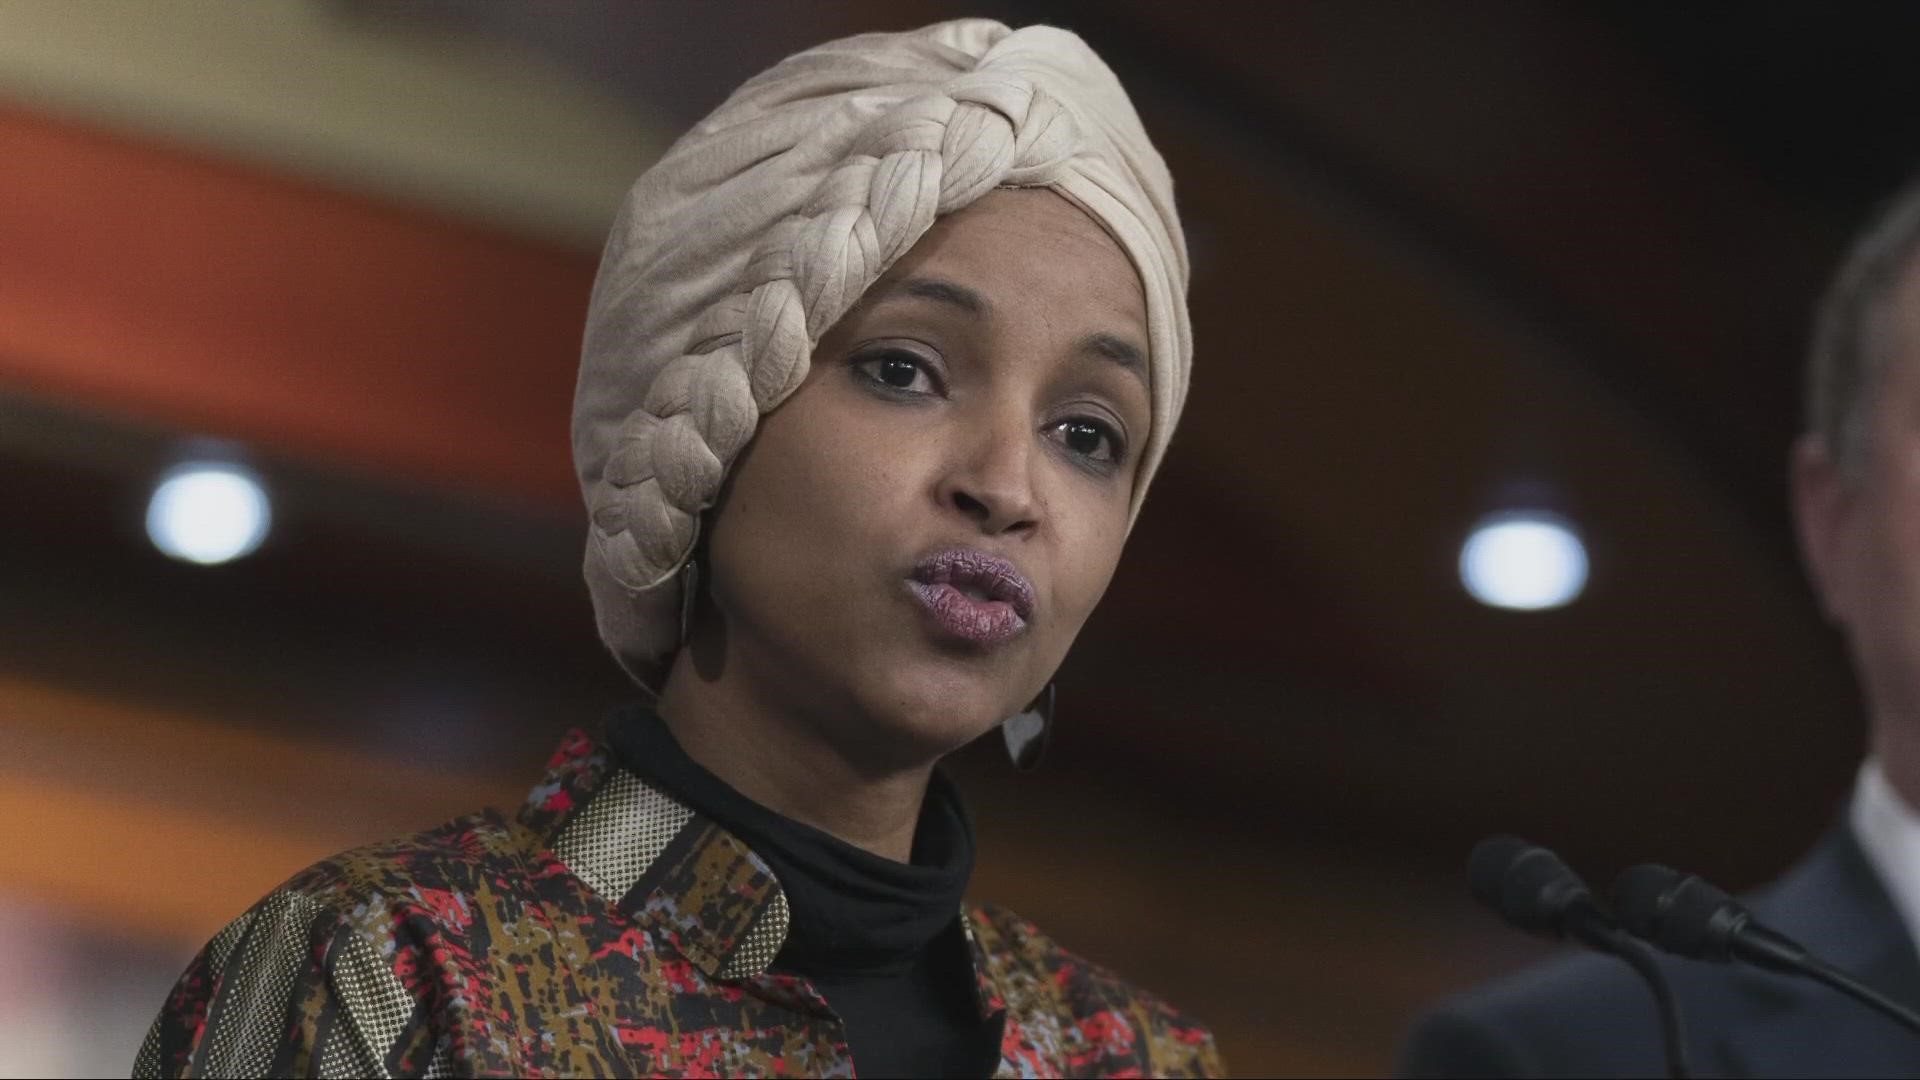 The 218-211 vote, mostly along party lines, came after a heated, voices-raised debate in which Democrats accused the GOP of targeting Omar based on her race.